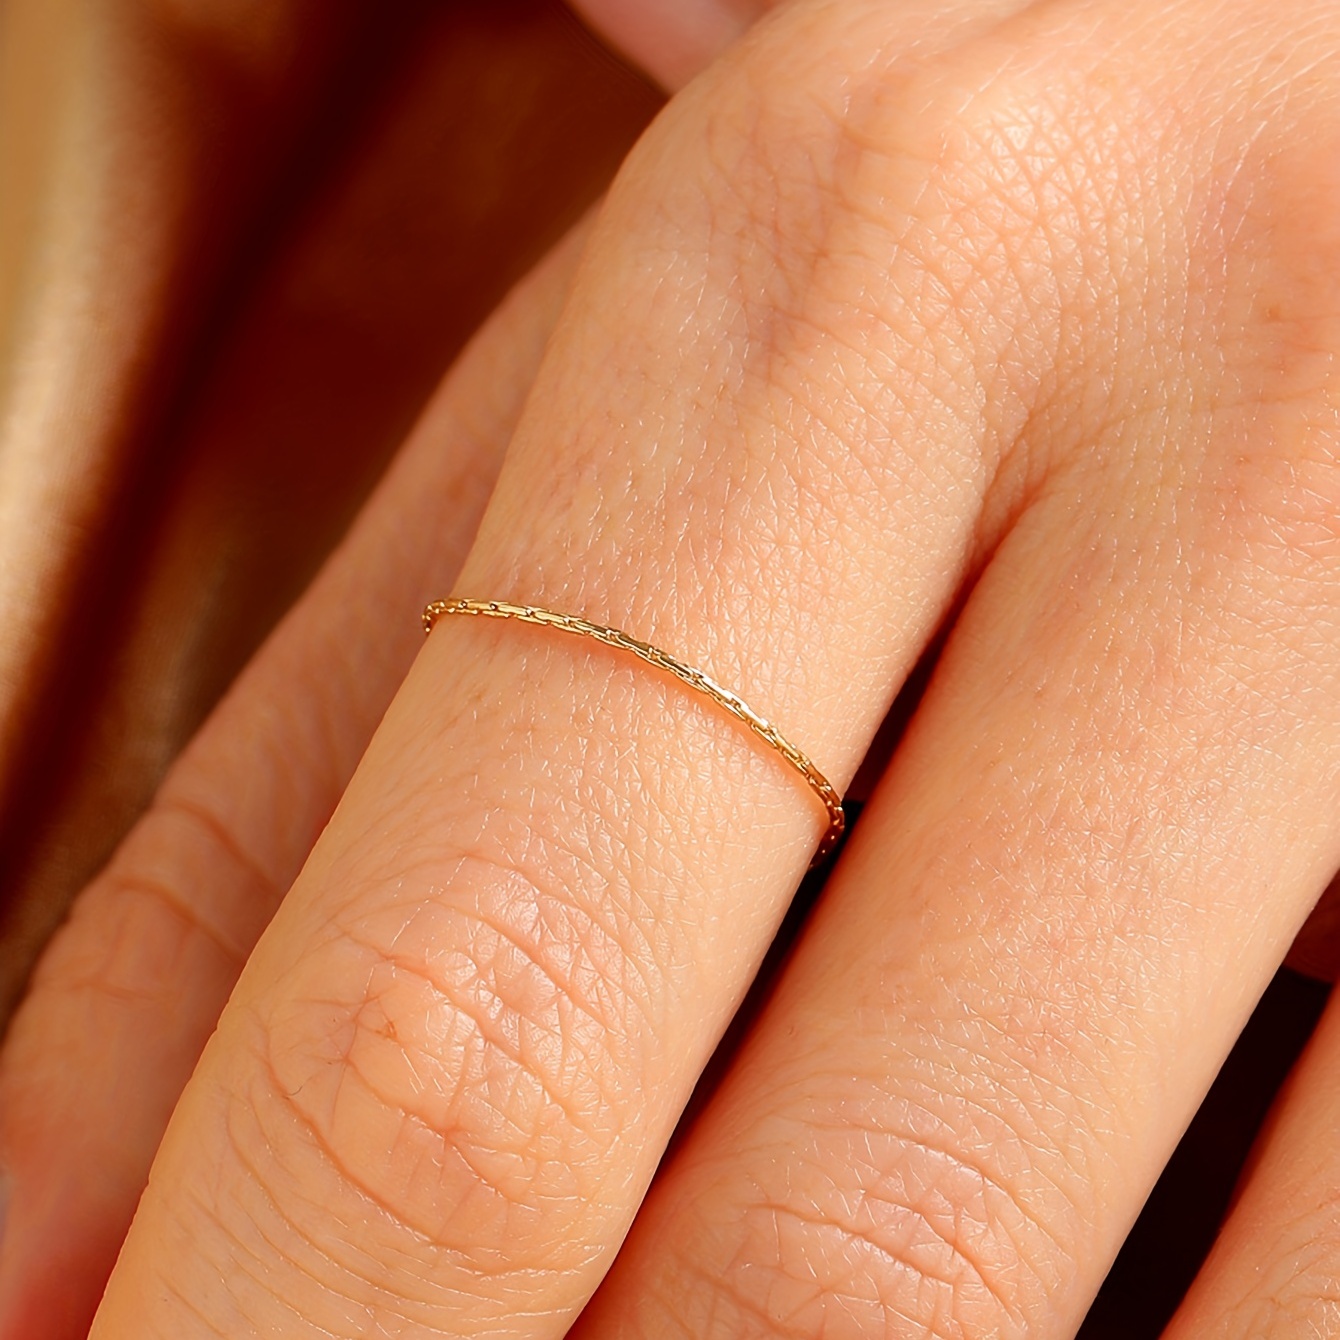 4 Finger Stacking Ring Double Rings Attached Tassel Chain Ring Gift For Her